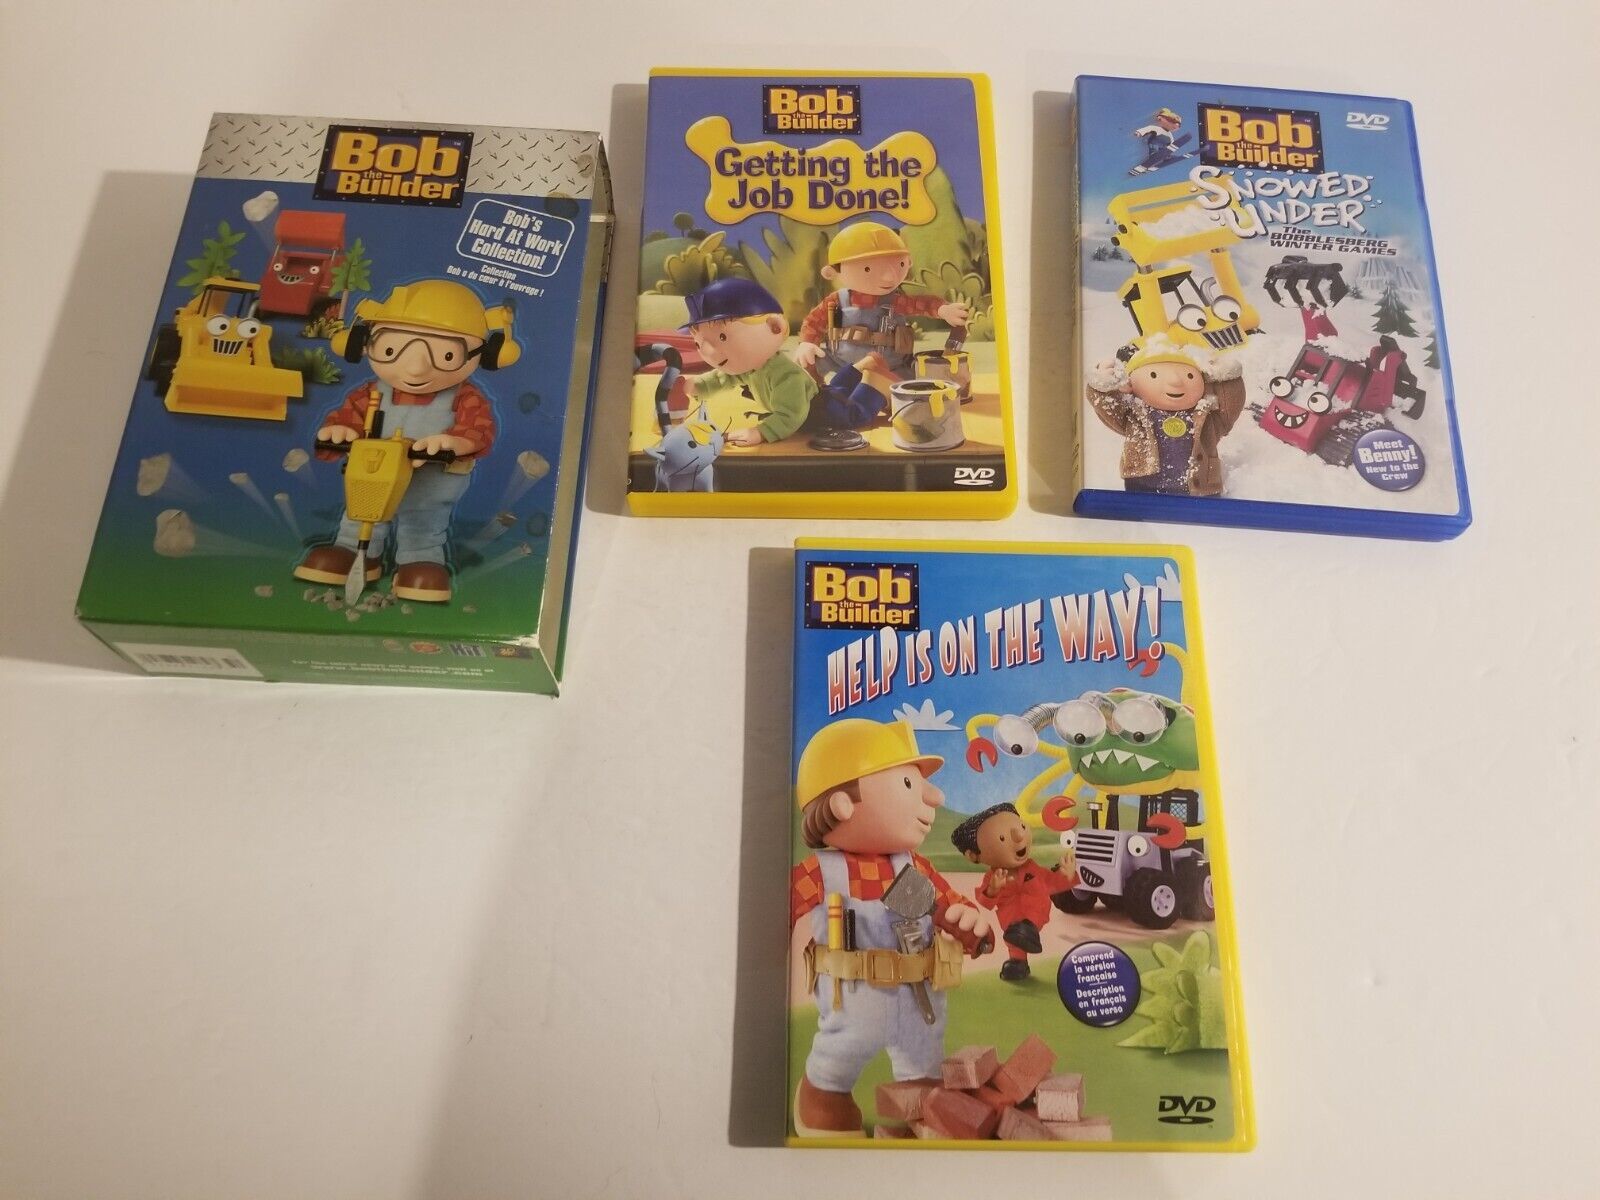 Primary image for Bob the Builder - Bobs Hard at Work Collection (DVD, 2006, 3-Disc Set)